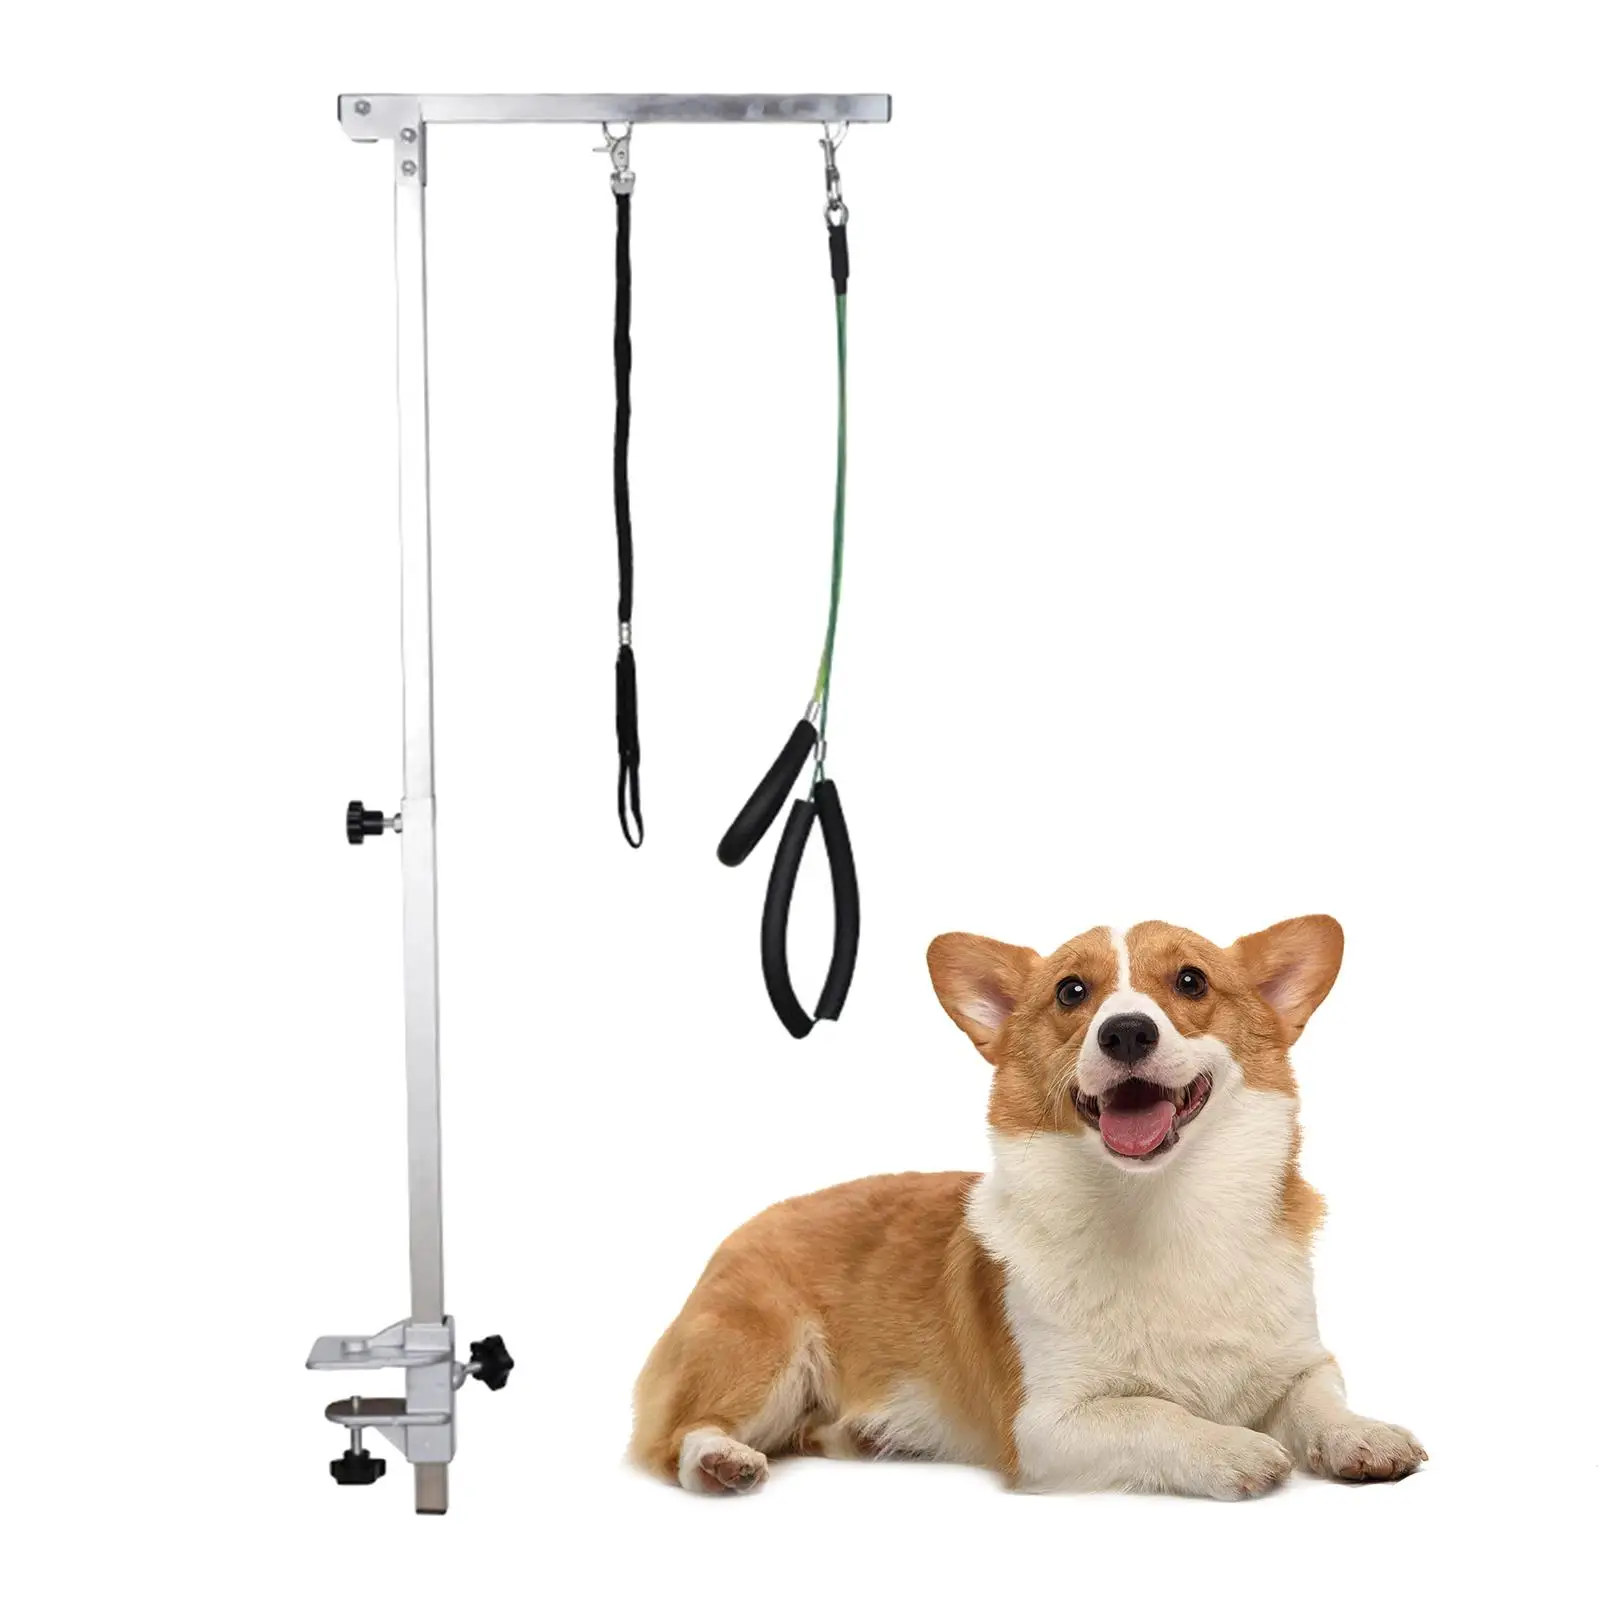 Grooming Table Bracket Pet Dog Grooming Table Bracket Arm Adjustable with Clamps Portable